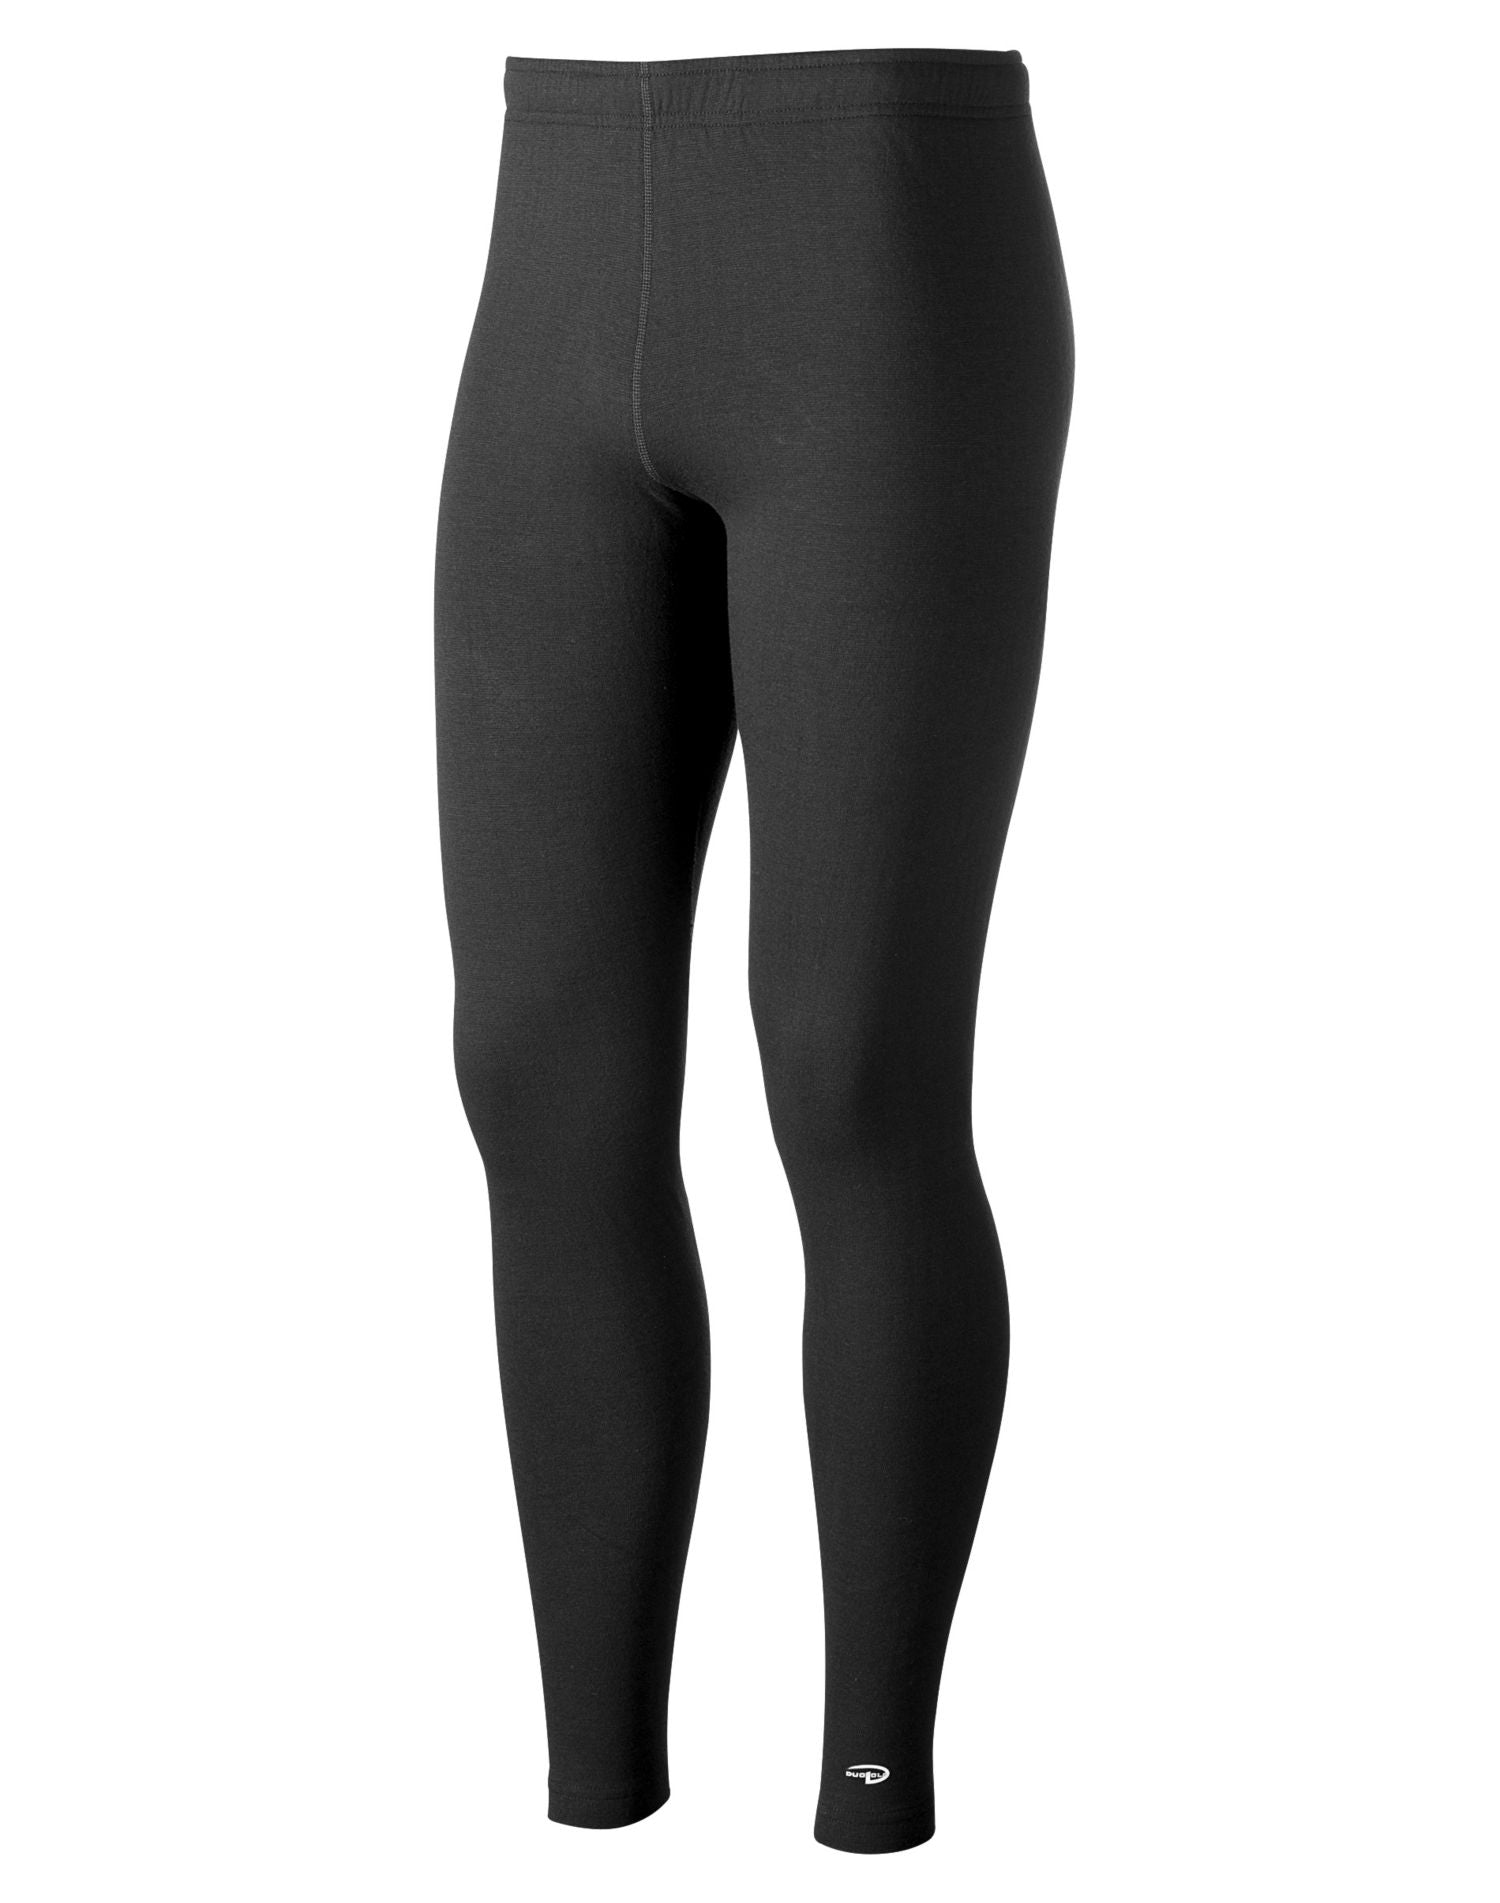 KEW2 - Duofold Varitherm Expedition-Weight 2-Layer Men's Thermal-Underwear  Bottoms